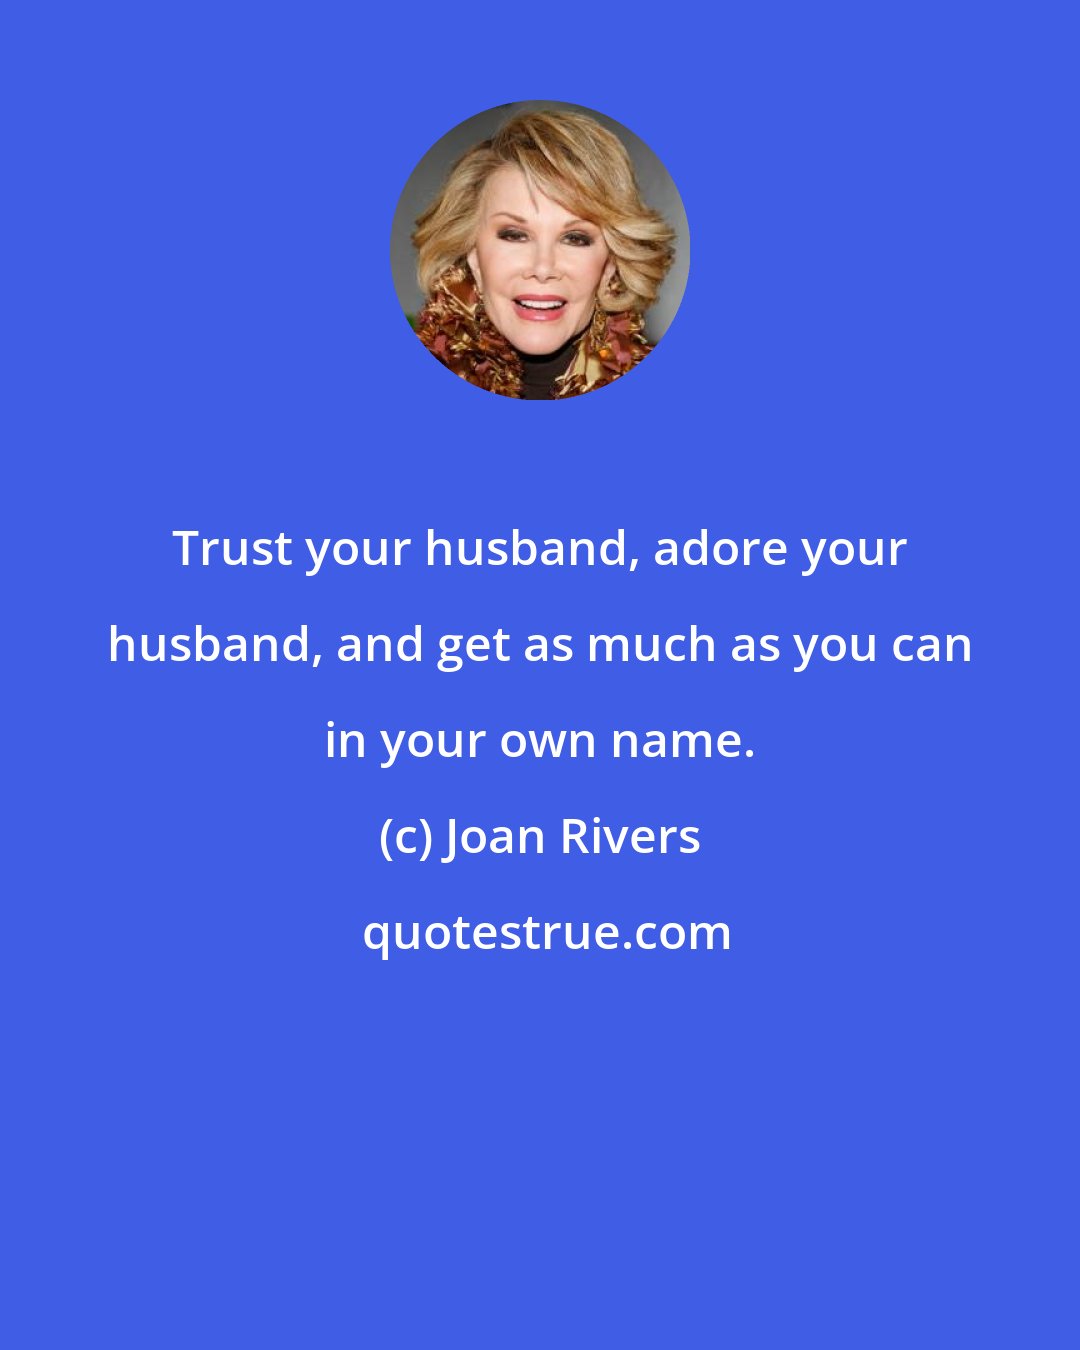 Joan Rivers: Trust your husband, adore your husband, and get as much as you can in your own name.